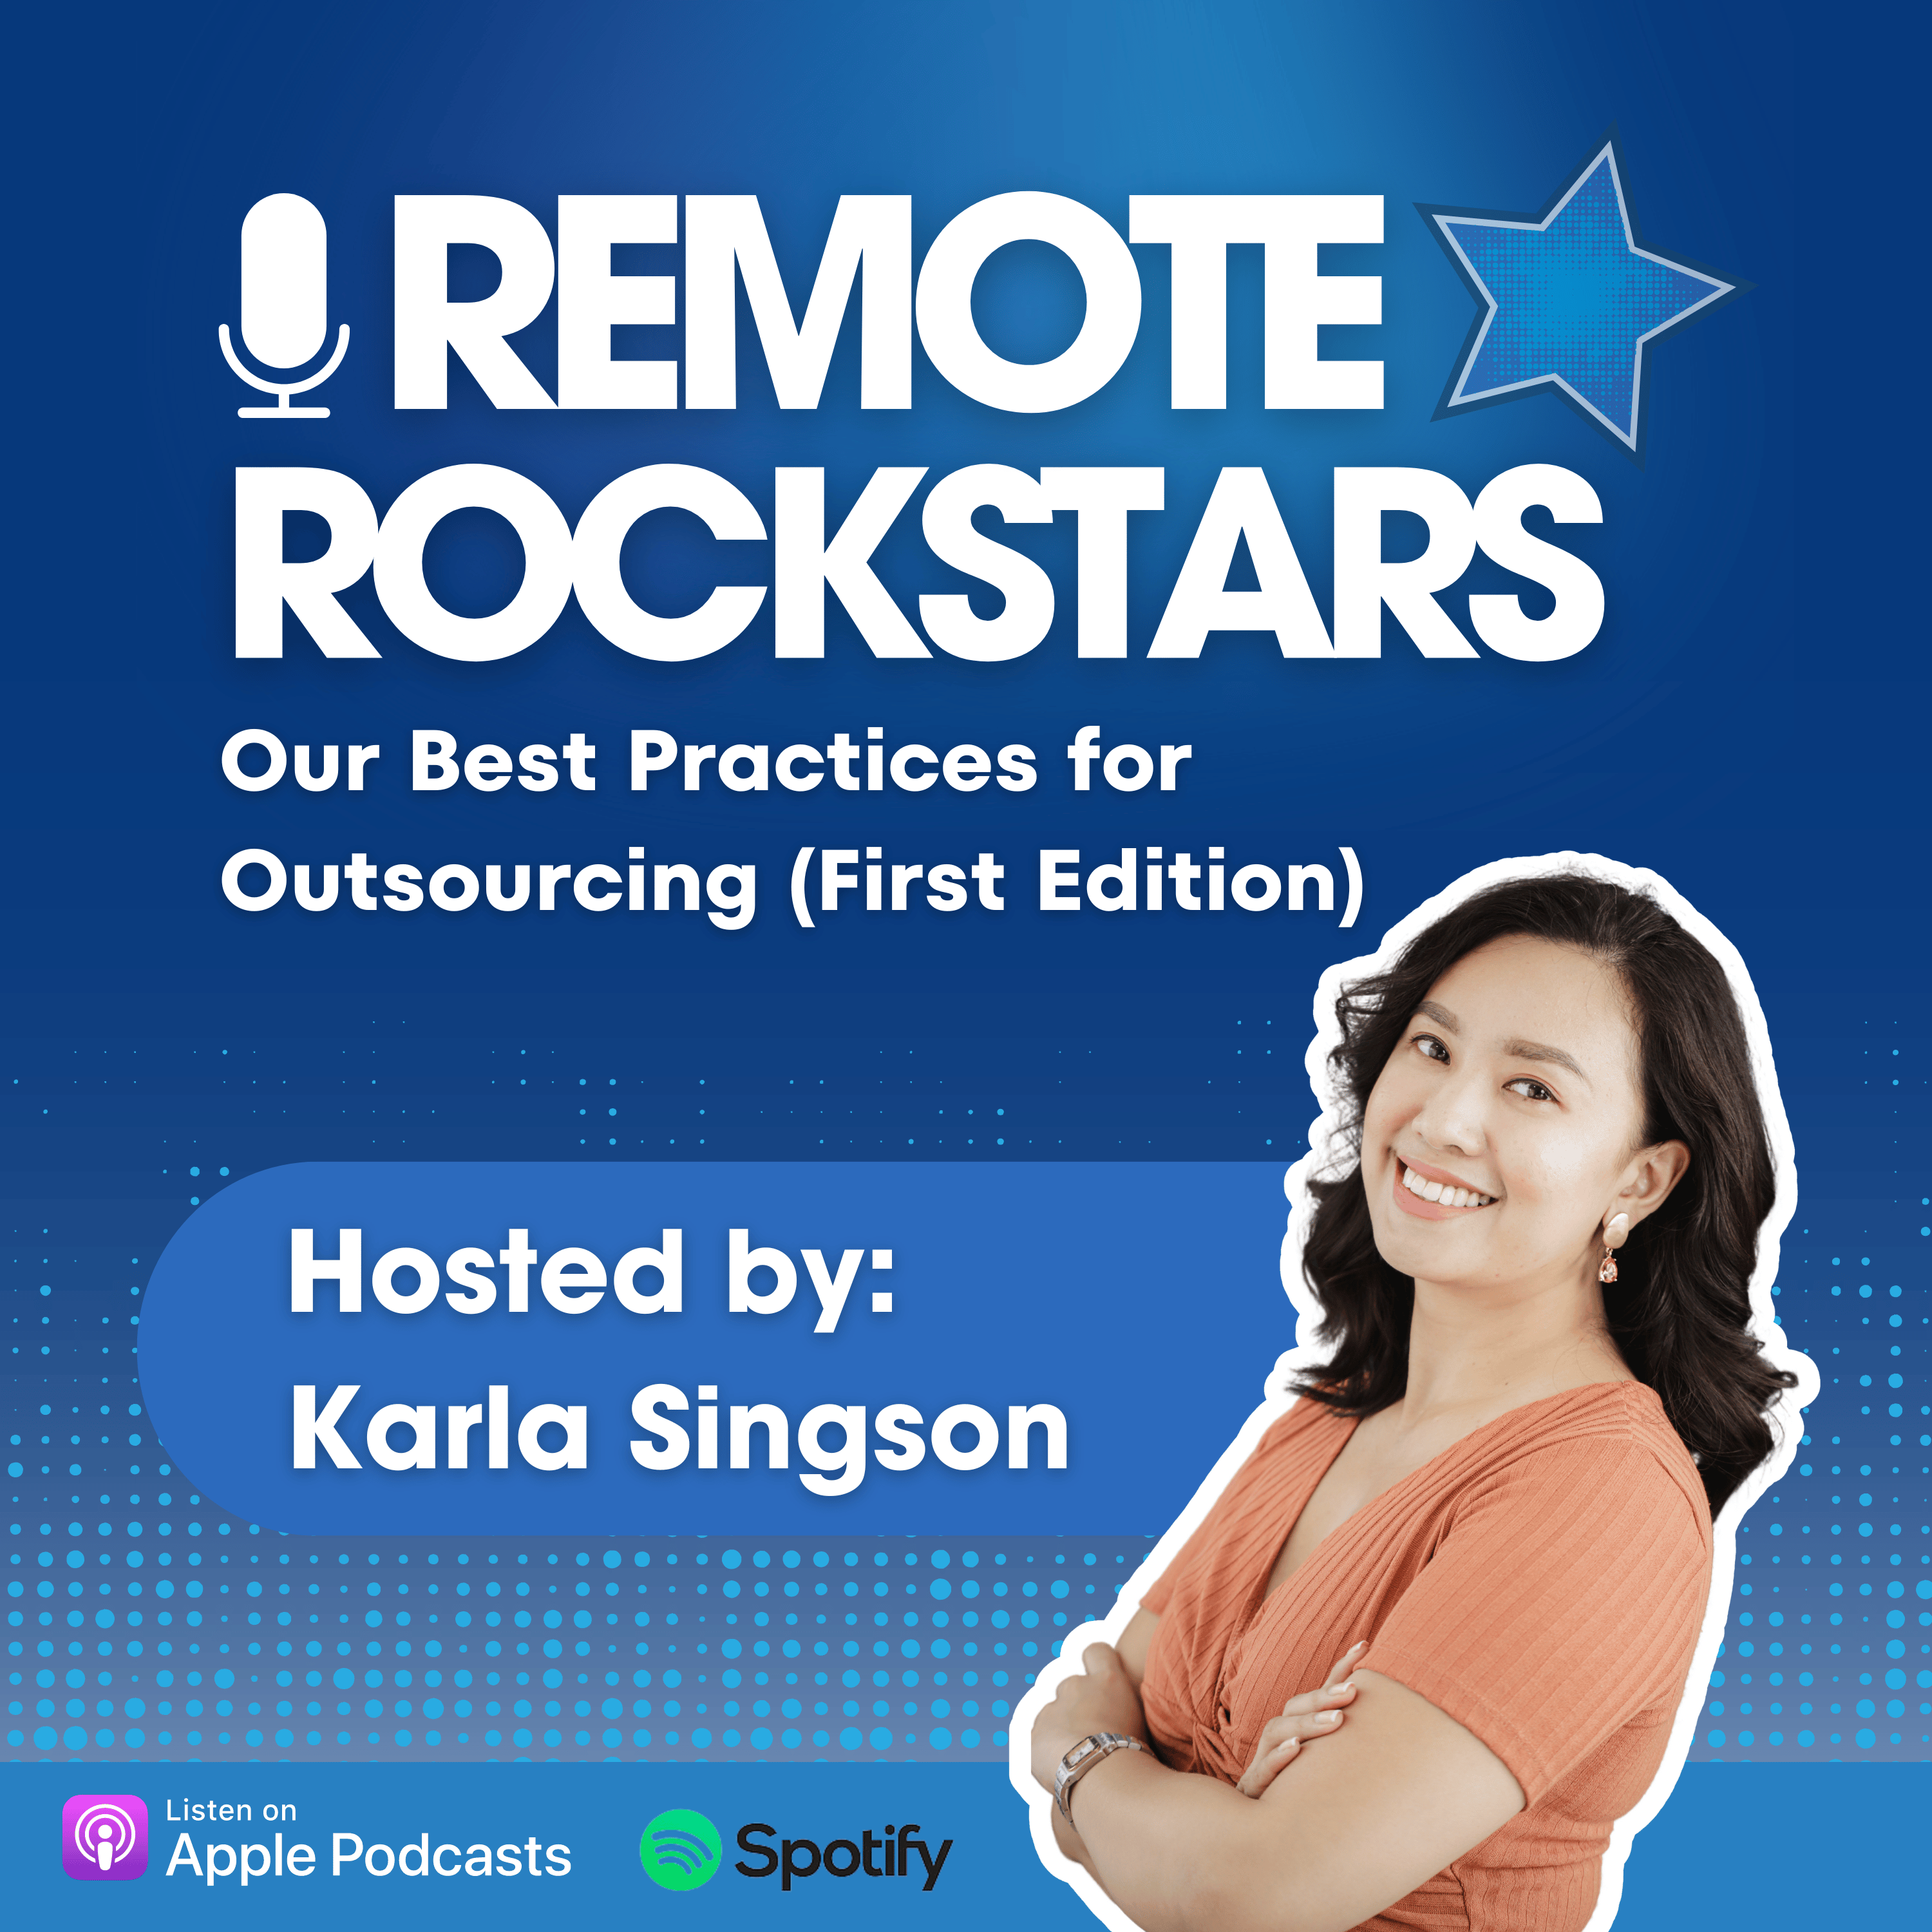 Our Best Practices for Outsourcing (First Edition)